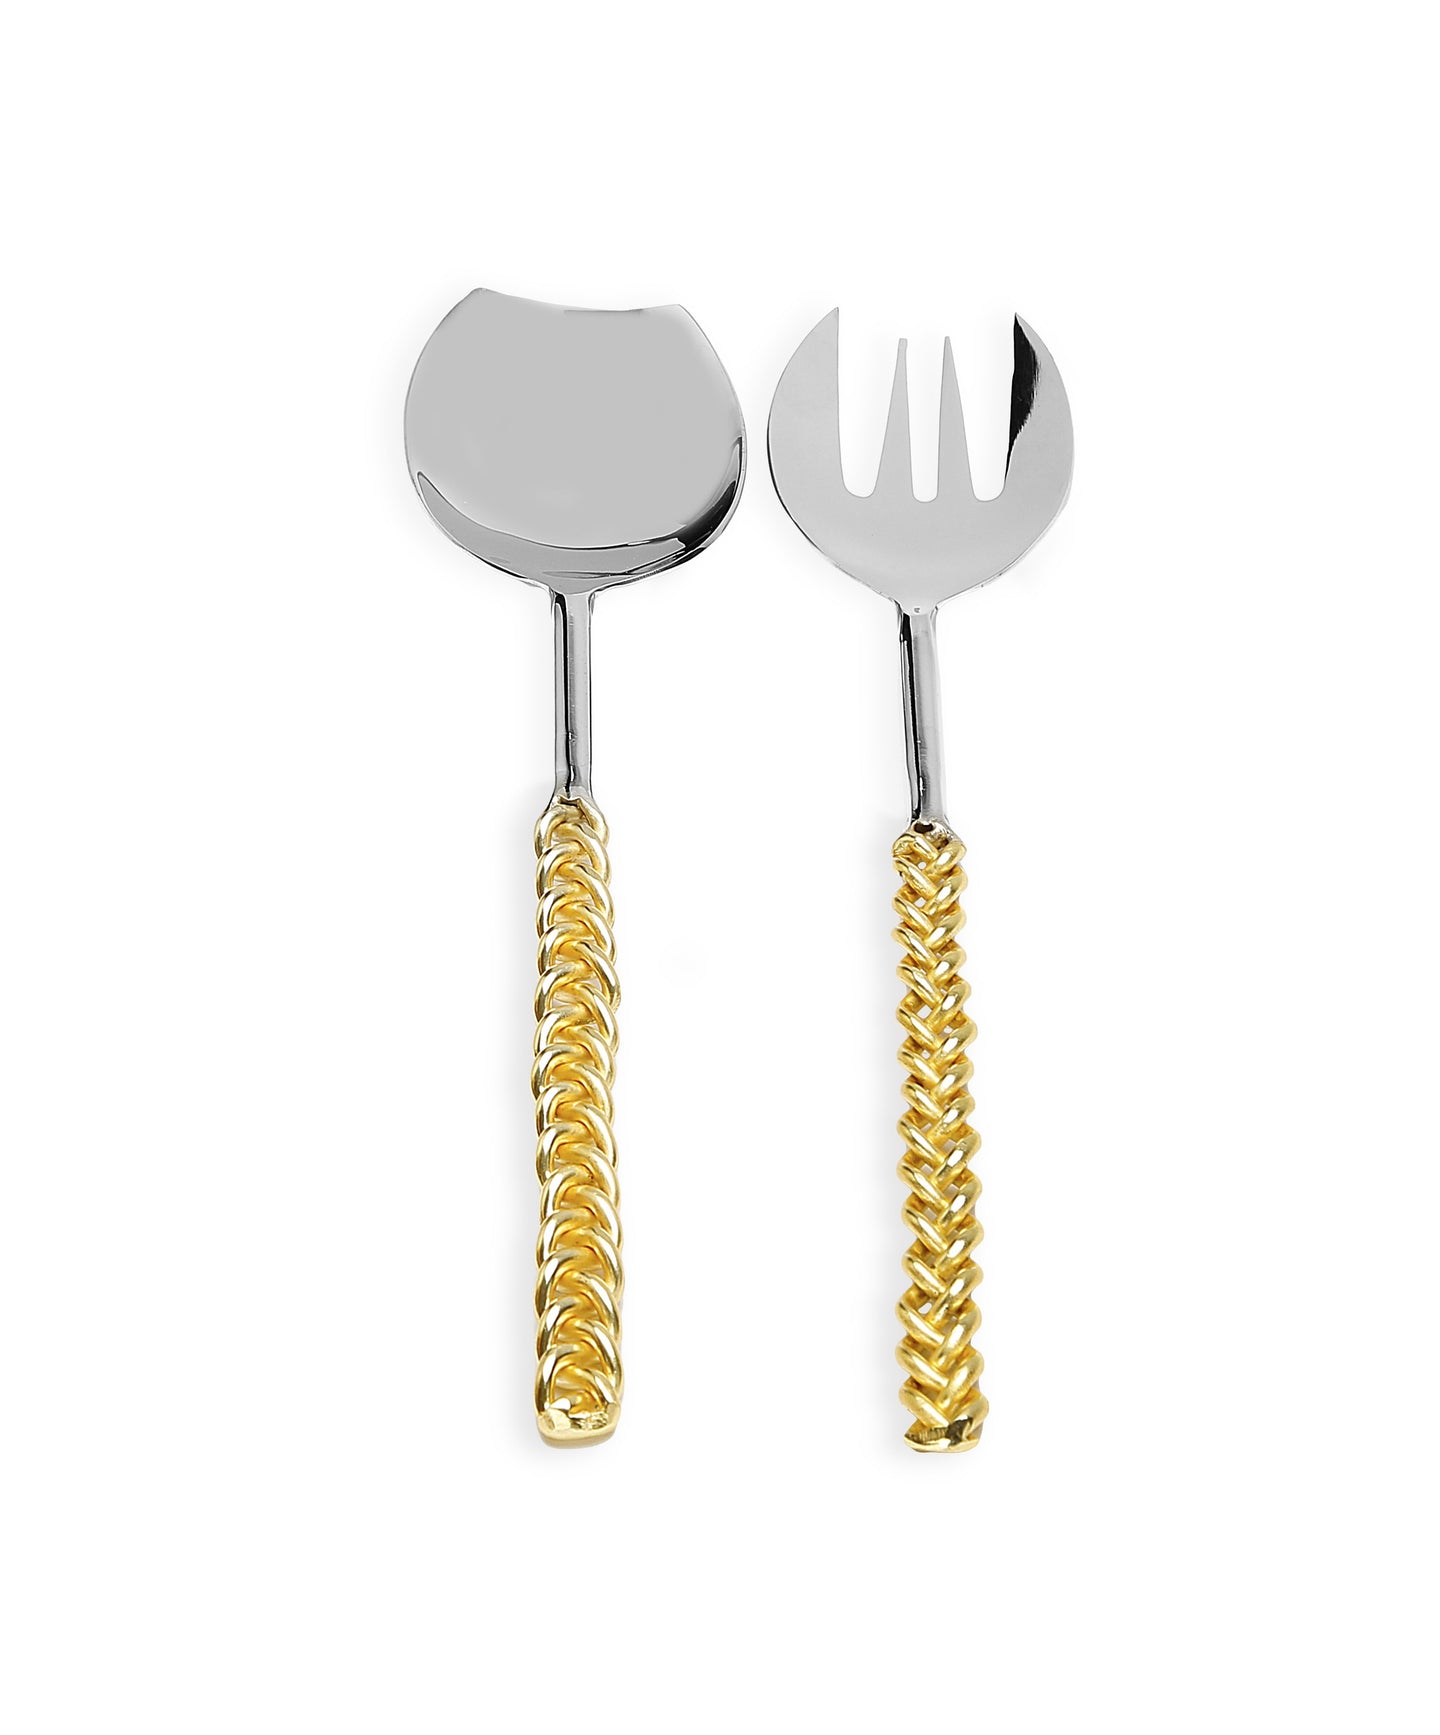 Set Of 2 Salad Servers With Gold Twisted Handles